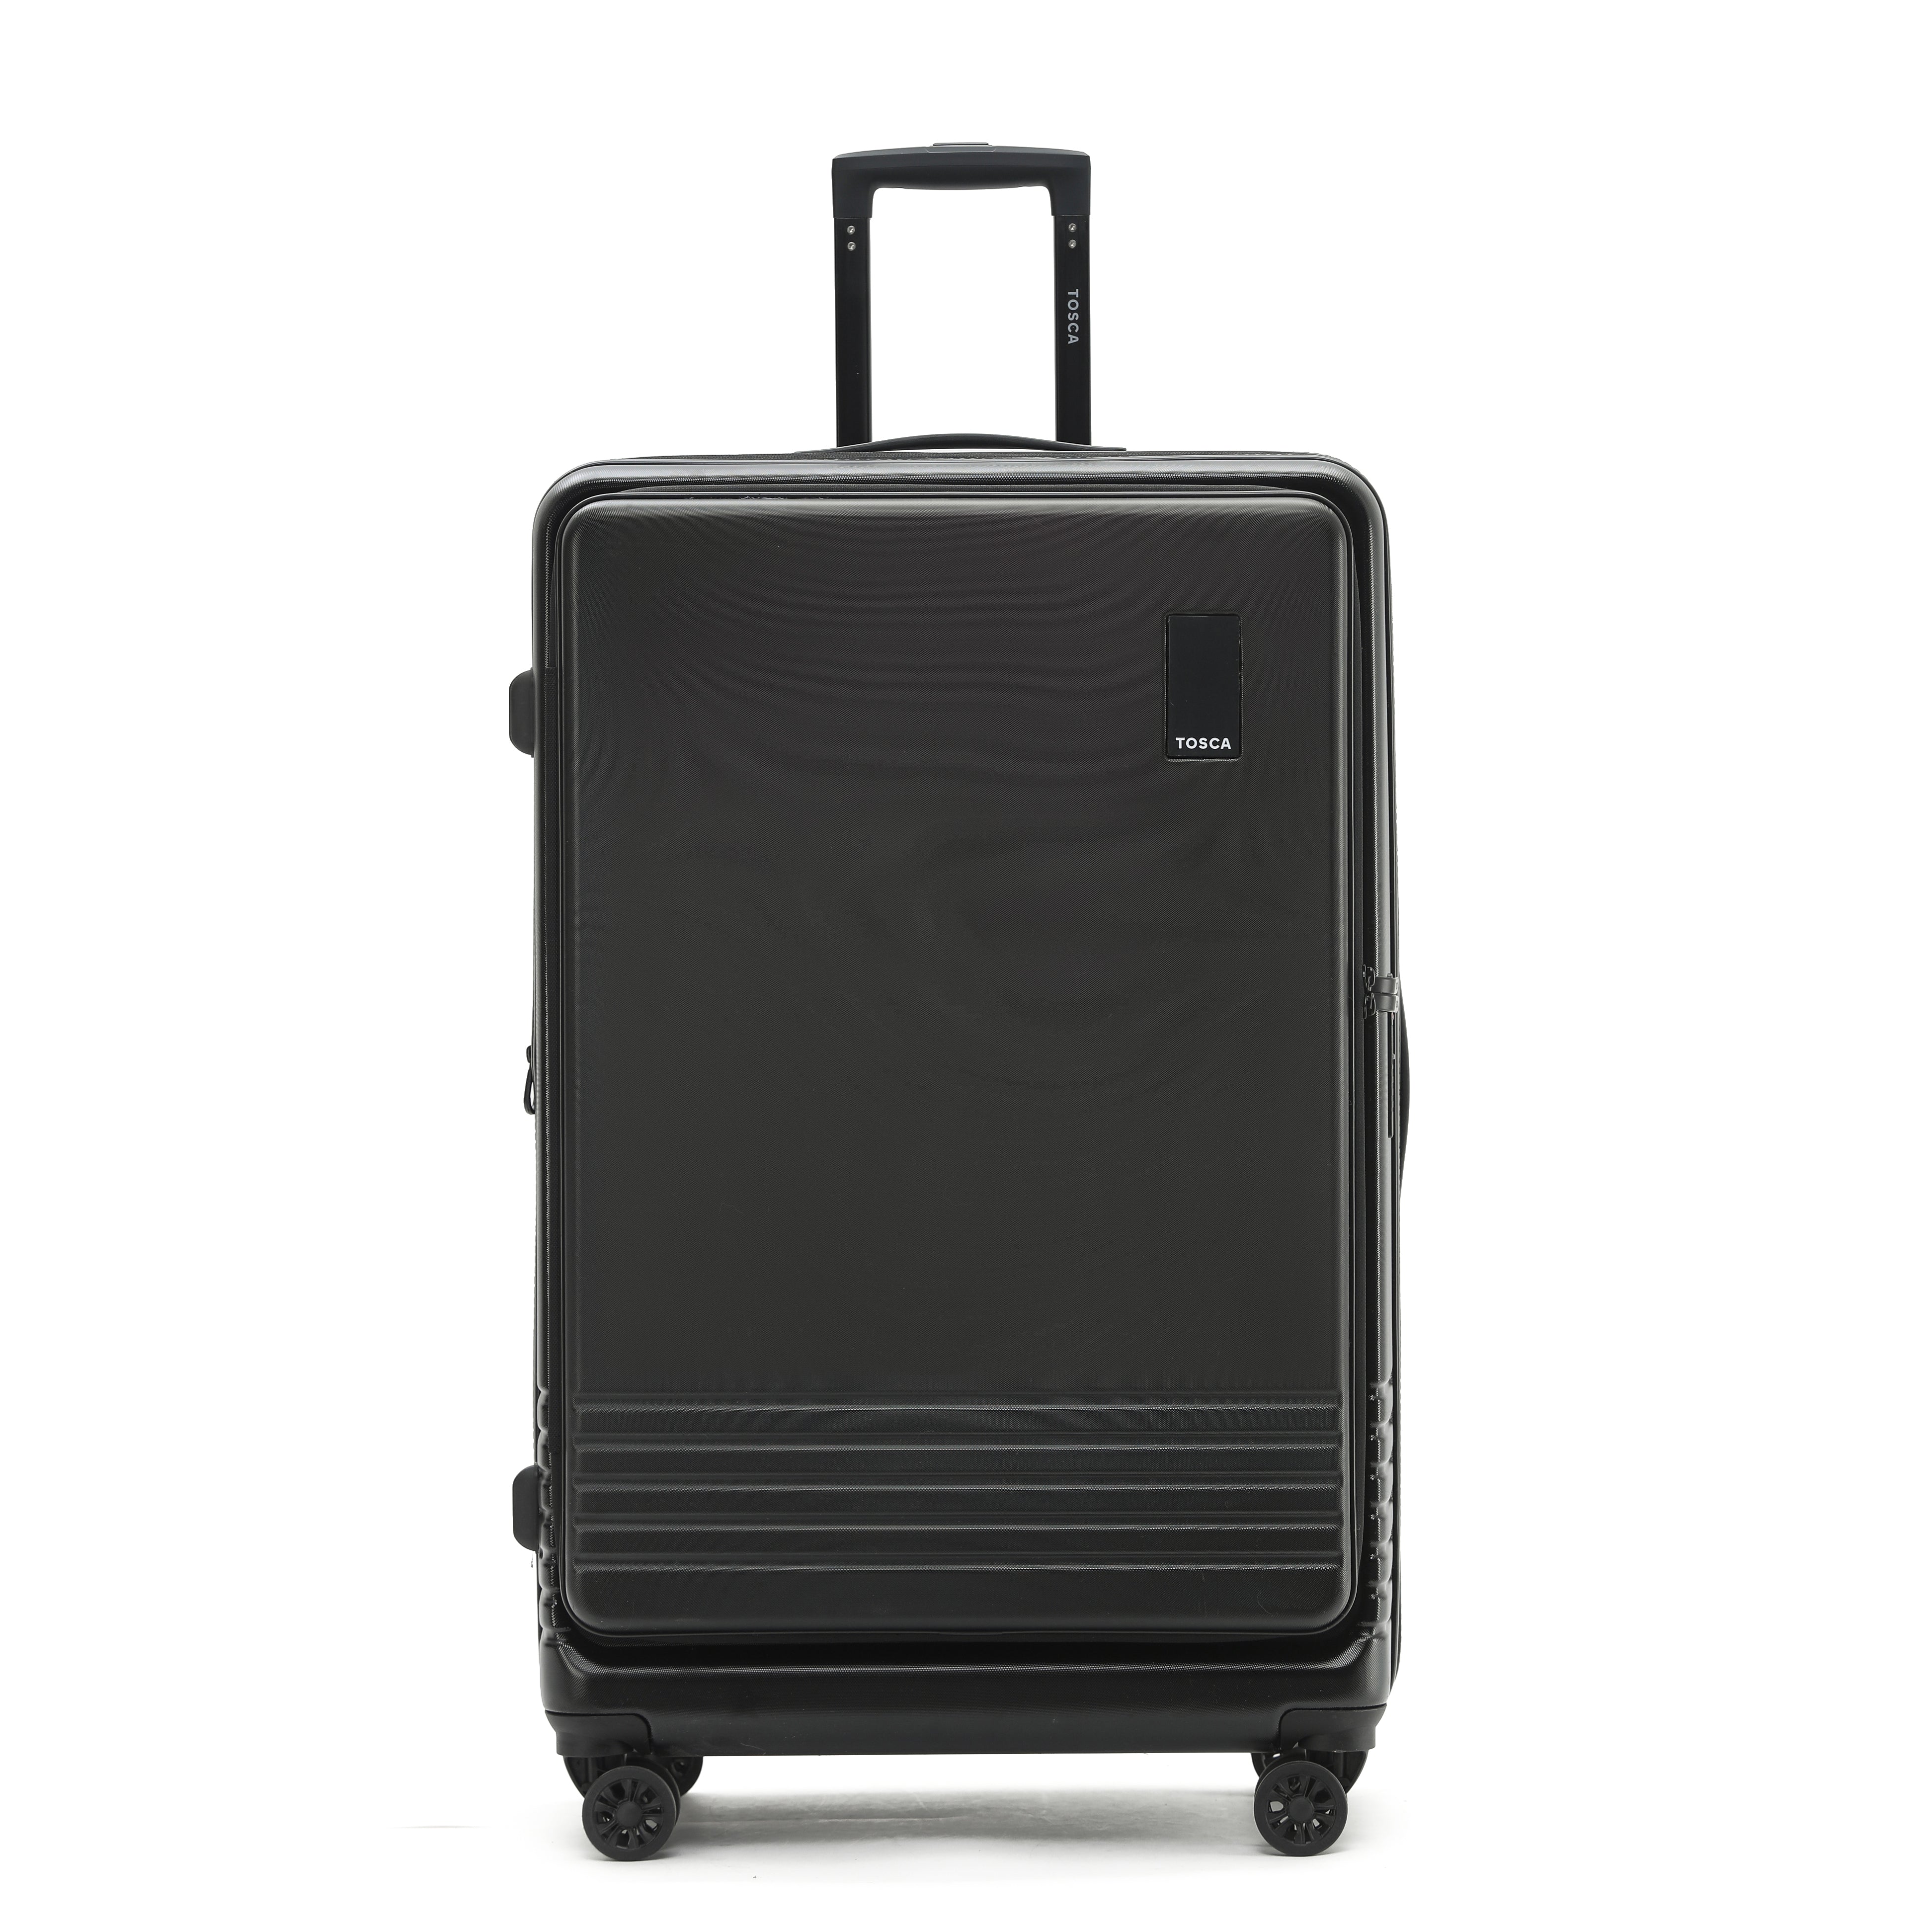 Tosca - TCA644 Horizon Front lid opening Set of 3 suitcases - Black-4